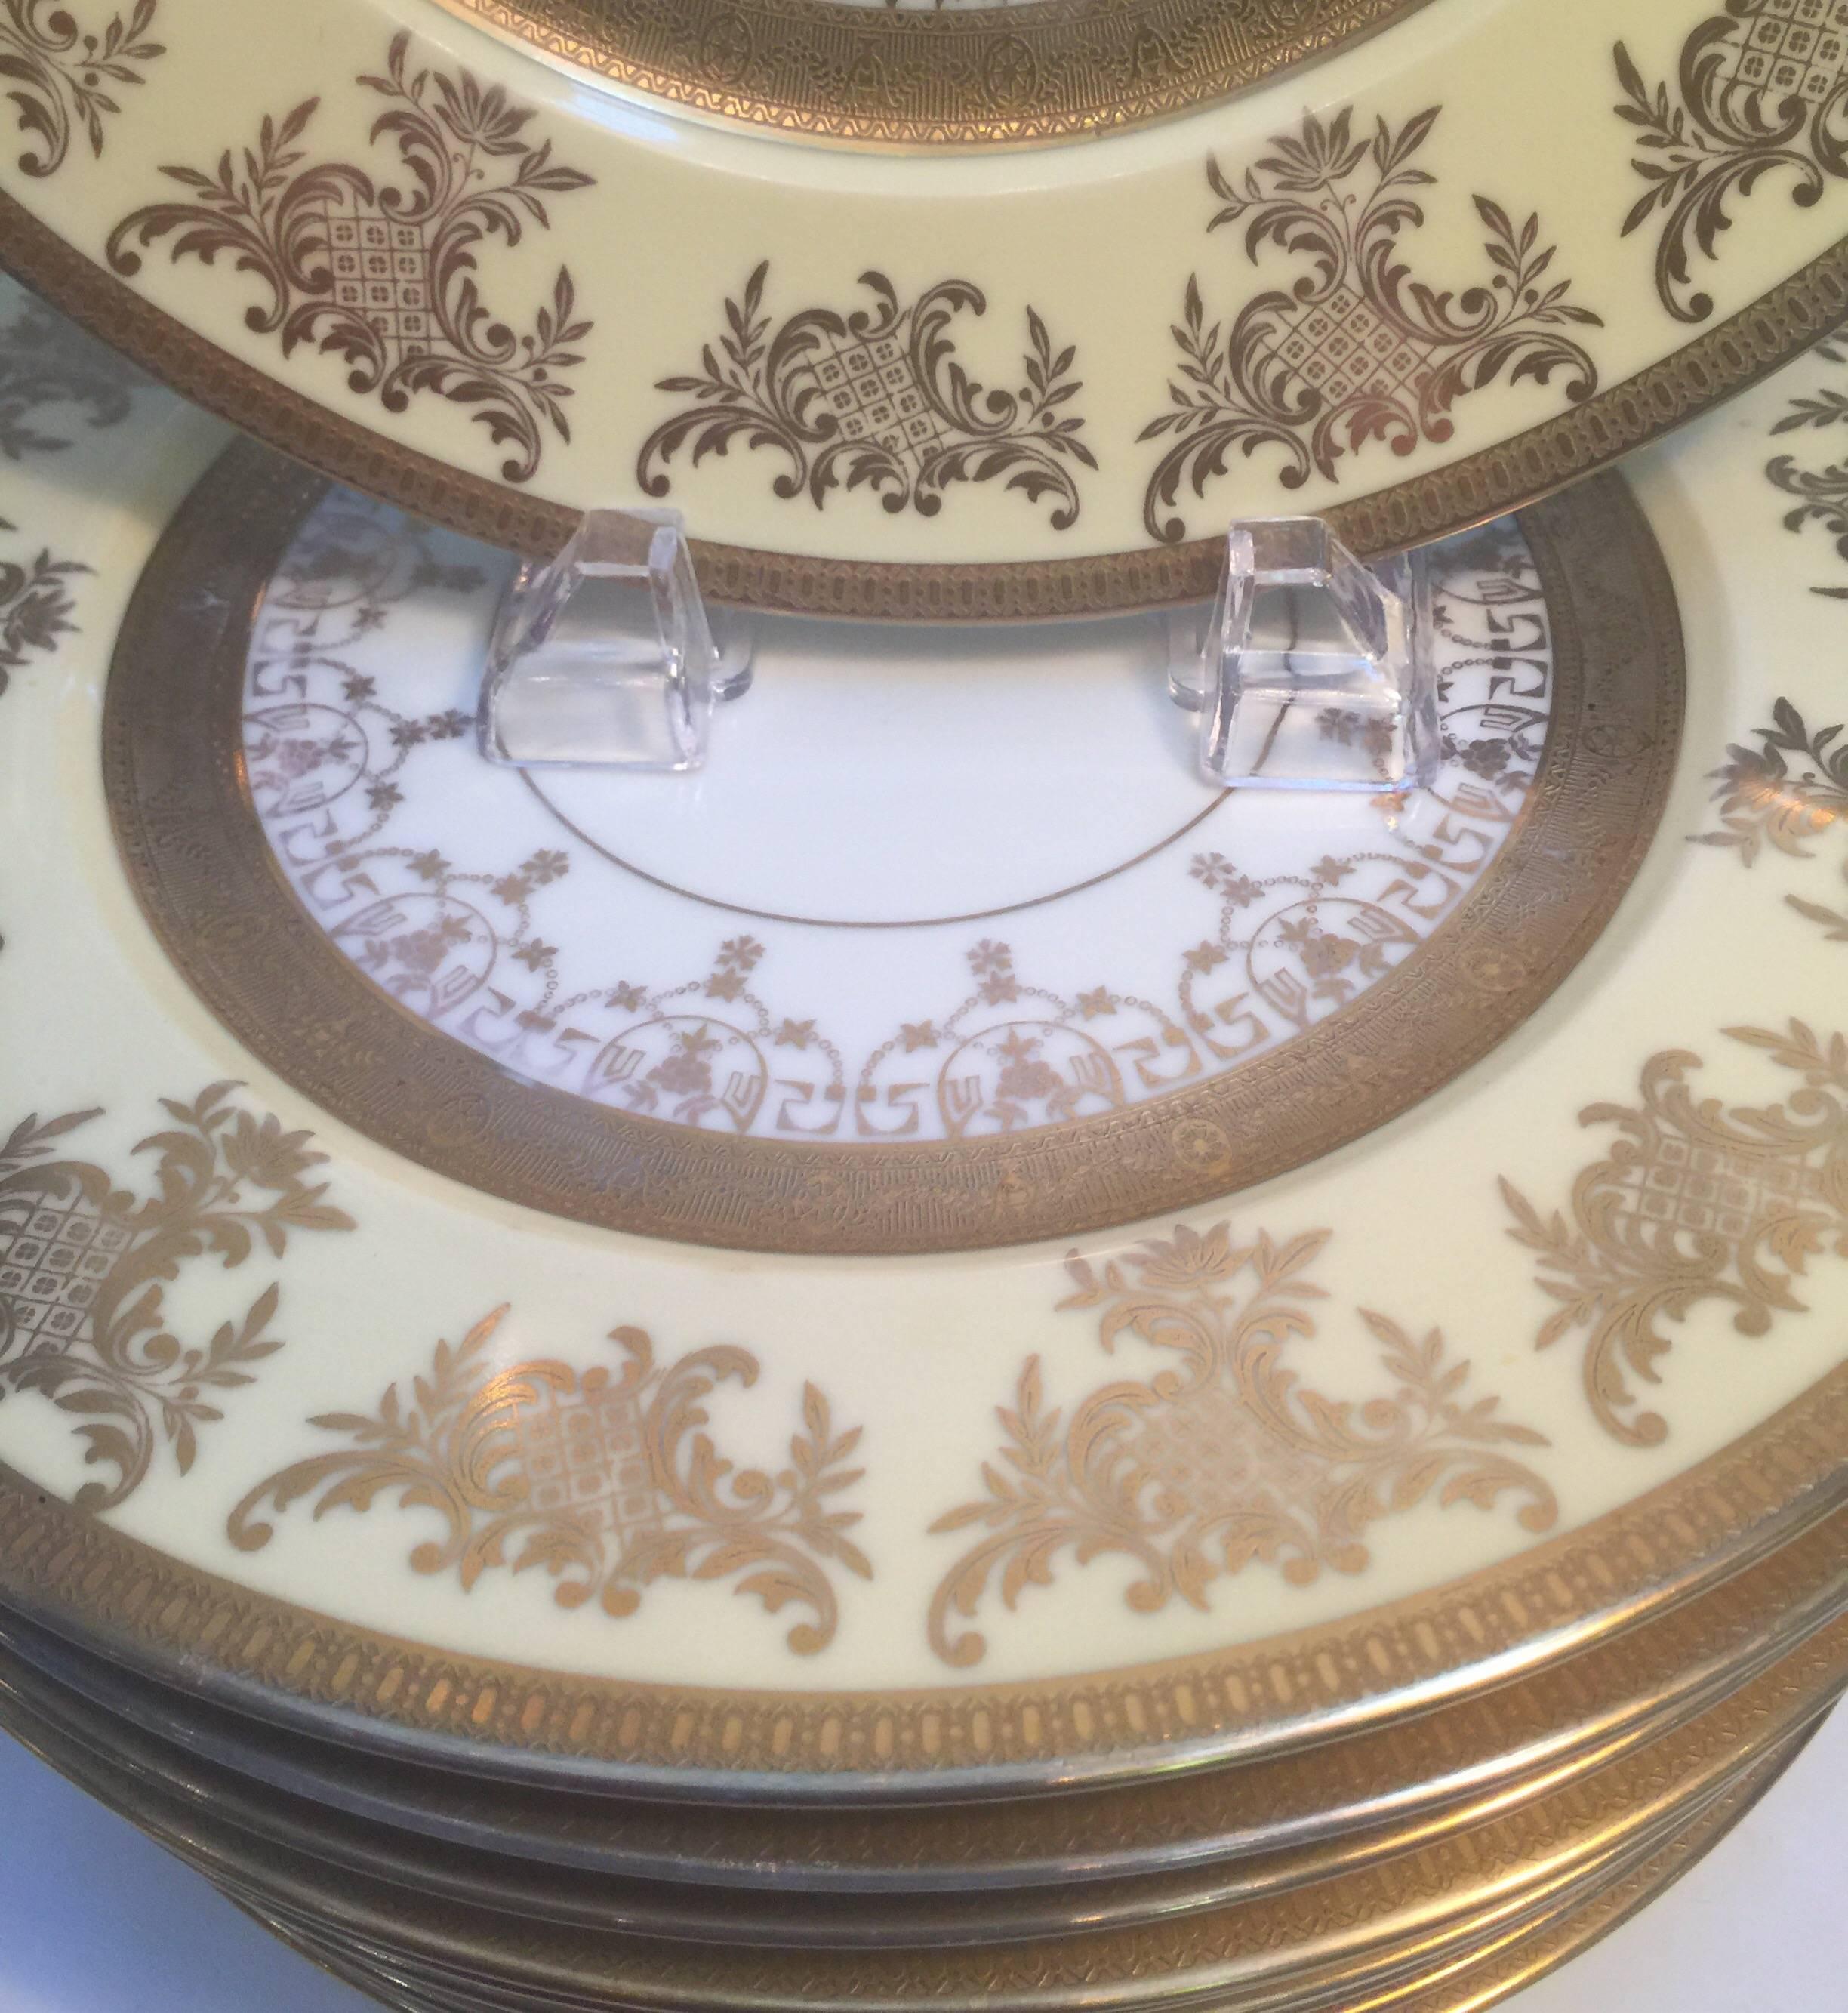 American Set of 12 Service Dinner Plates with Vanilla and Gilt Borders